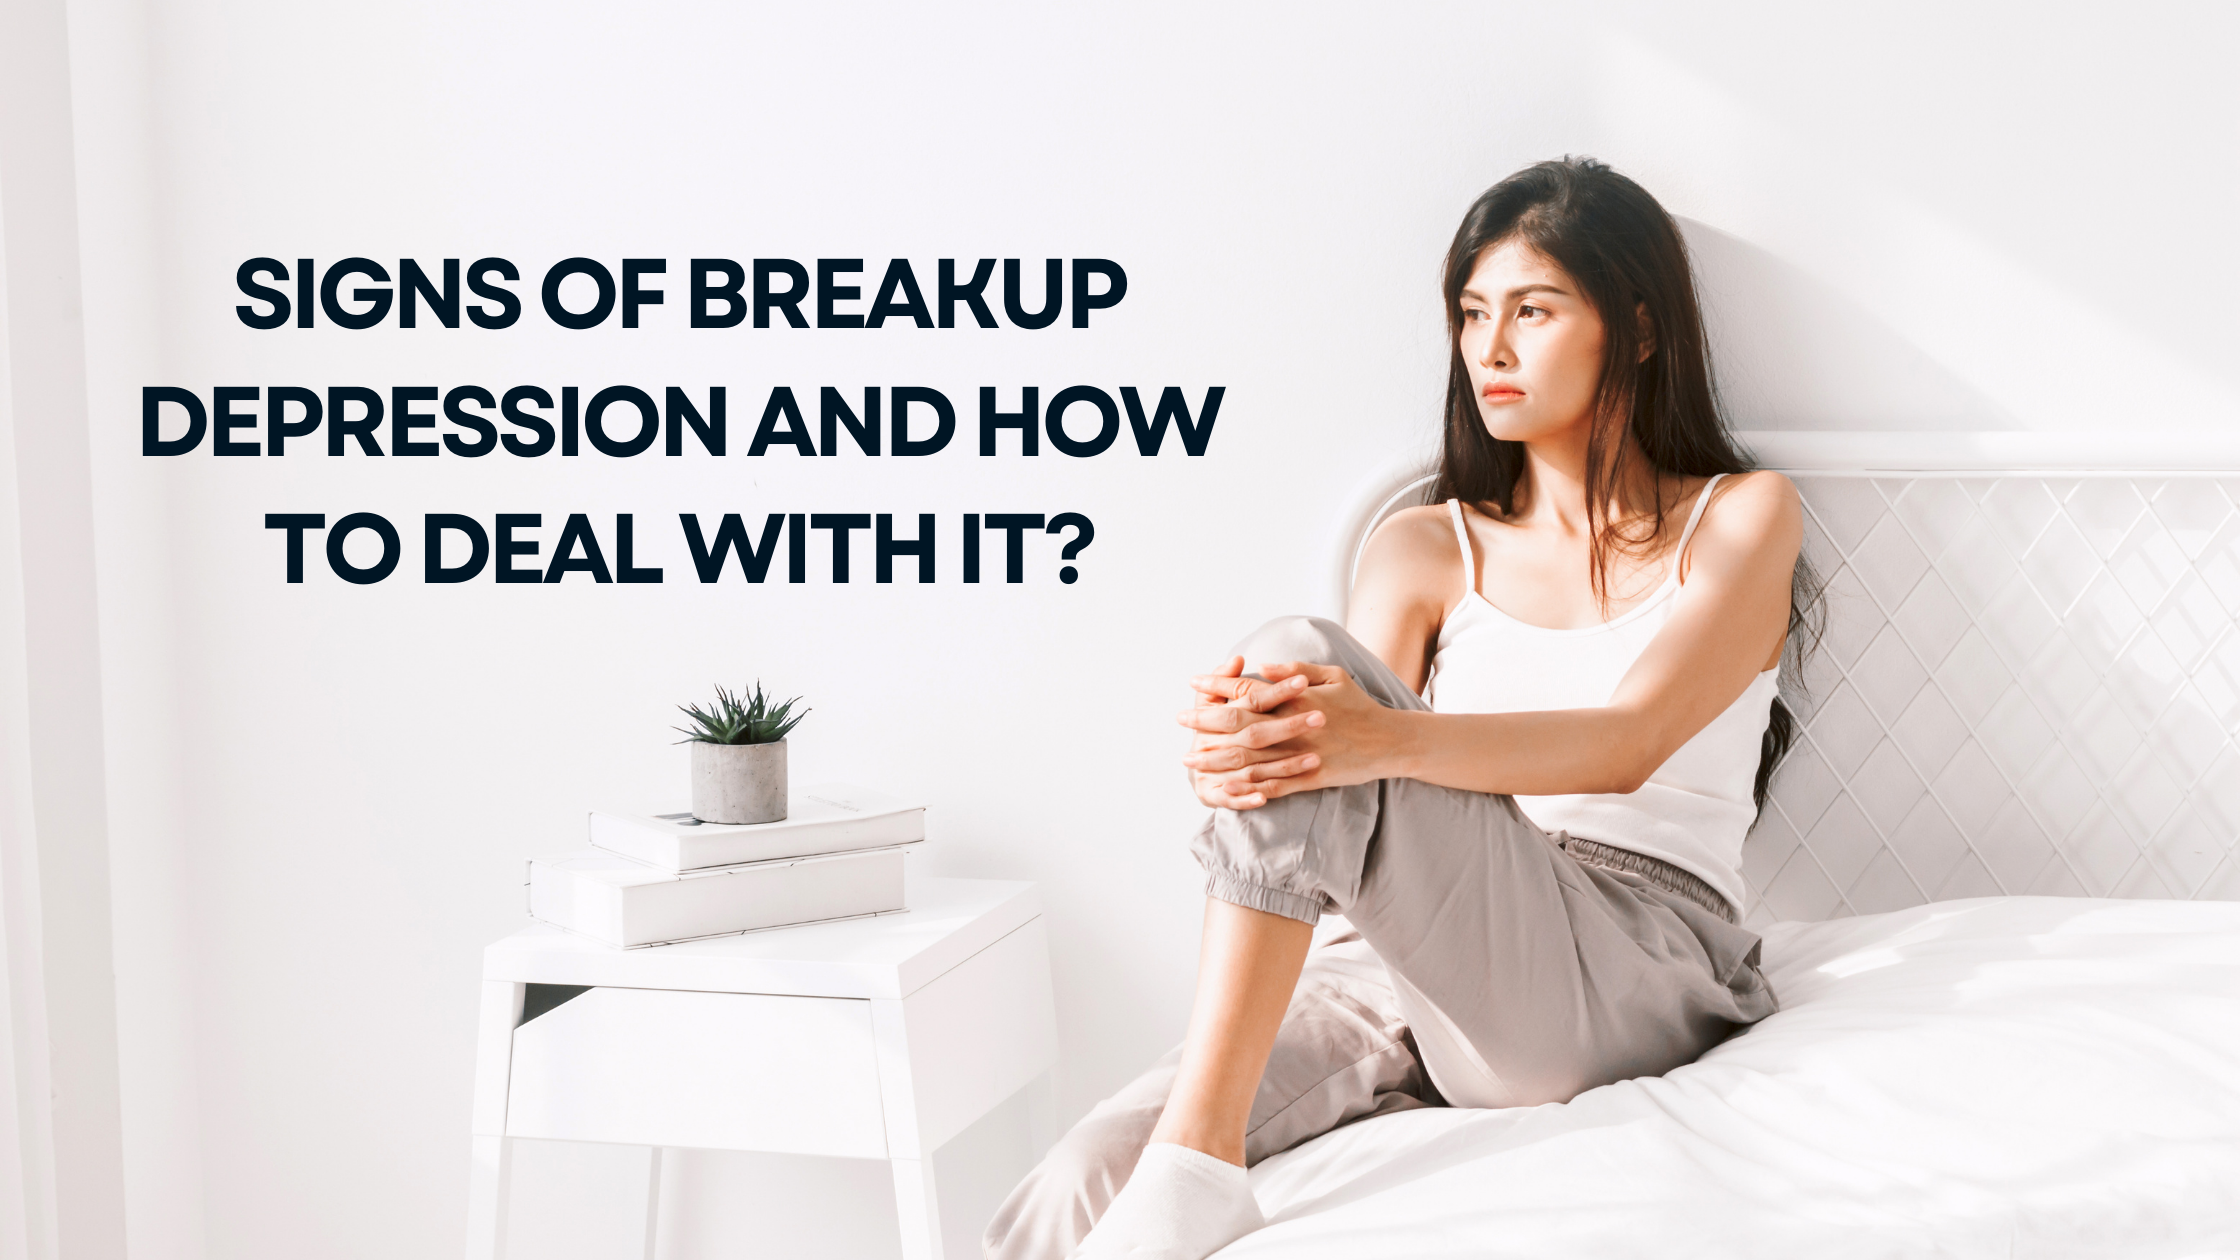 Signs of Breakup Depression and How to Deal with it